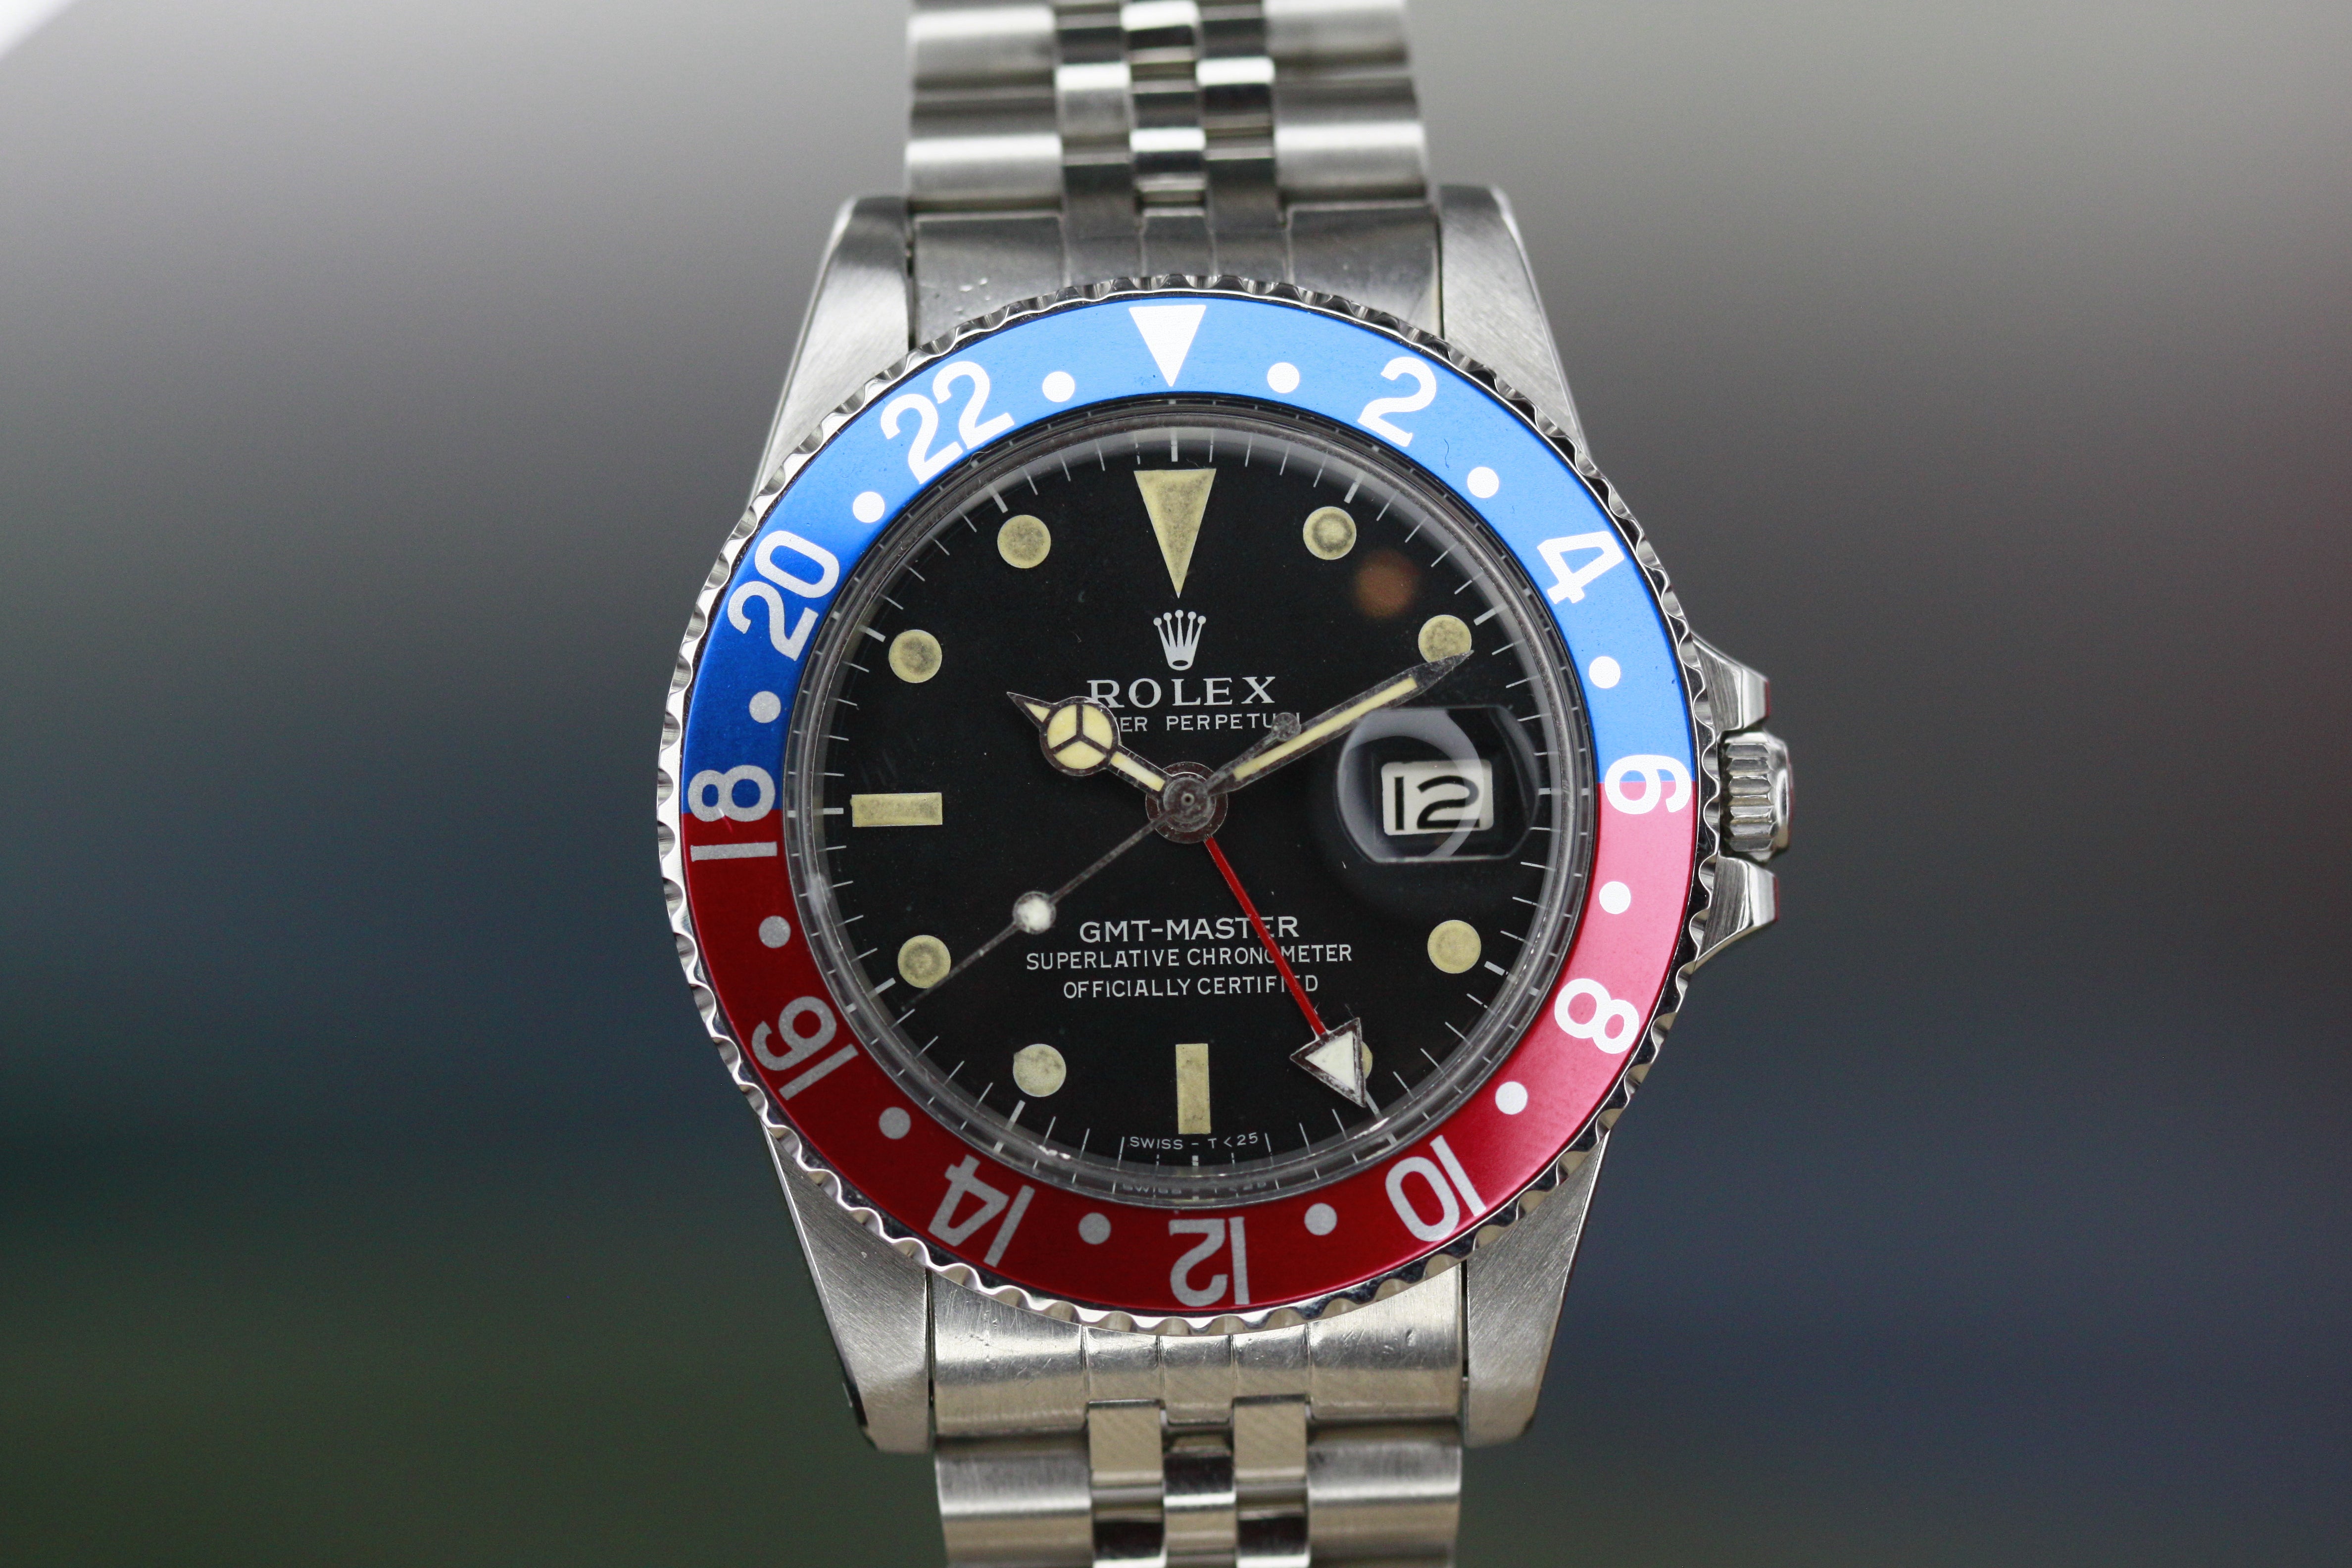 Rolex Oyster Perpetual Gmt-Master Ref.1675 ca.1970 Pepsi